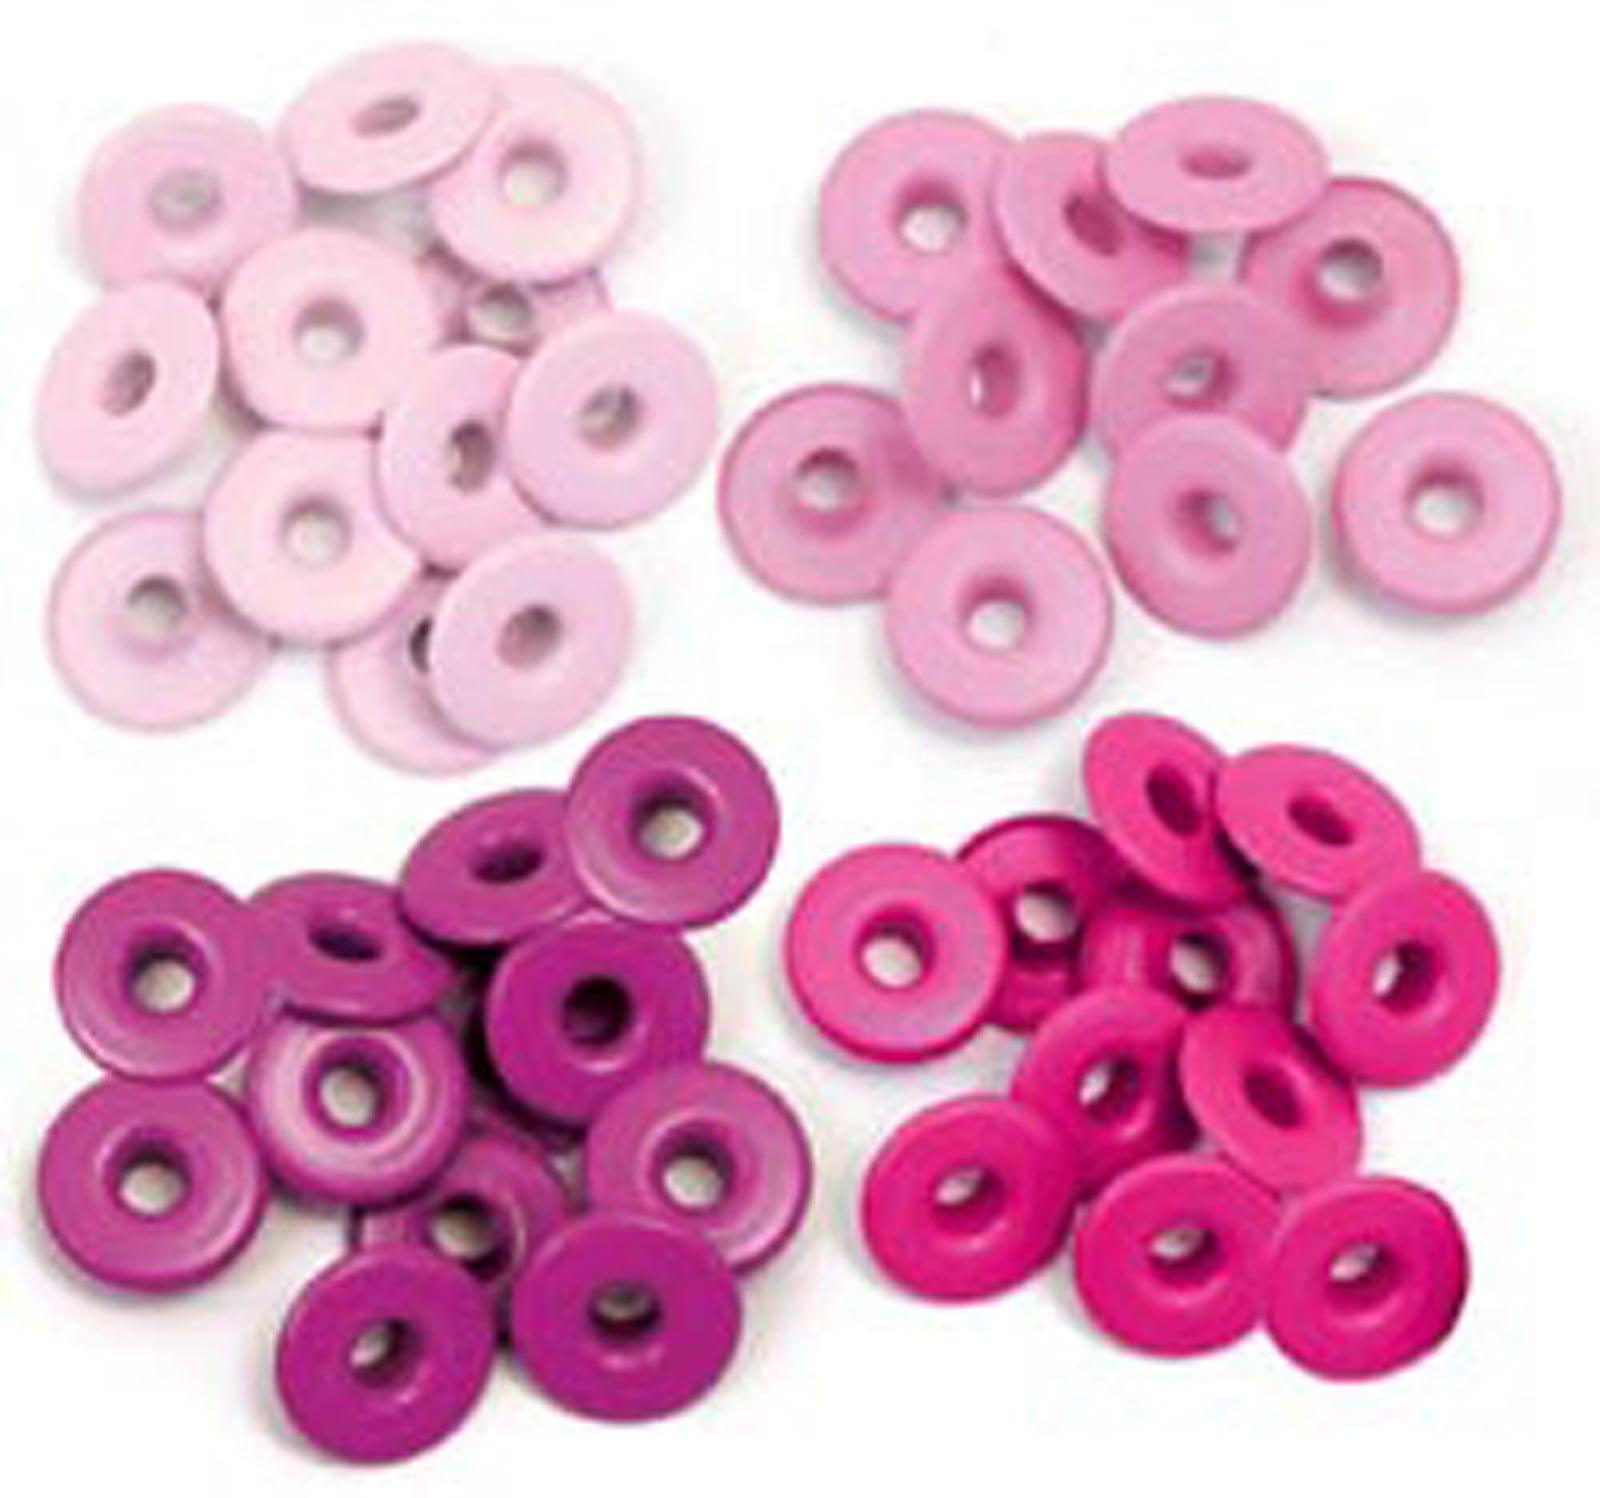 Wide Eyelets Collection Hues of Pink .1875" Scrapbook Eyelets by We R Memory Keepers - 40 Pieces (10 of each color) - Scrapbook Supply Companies